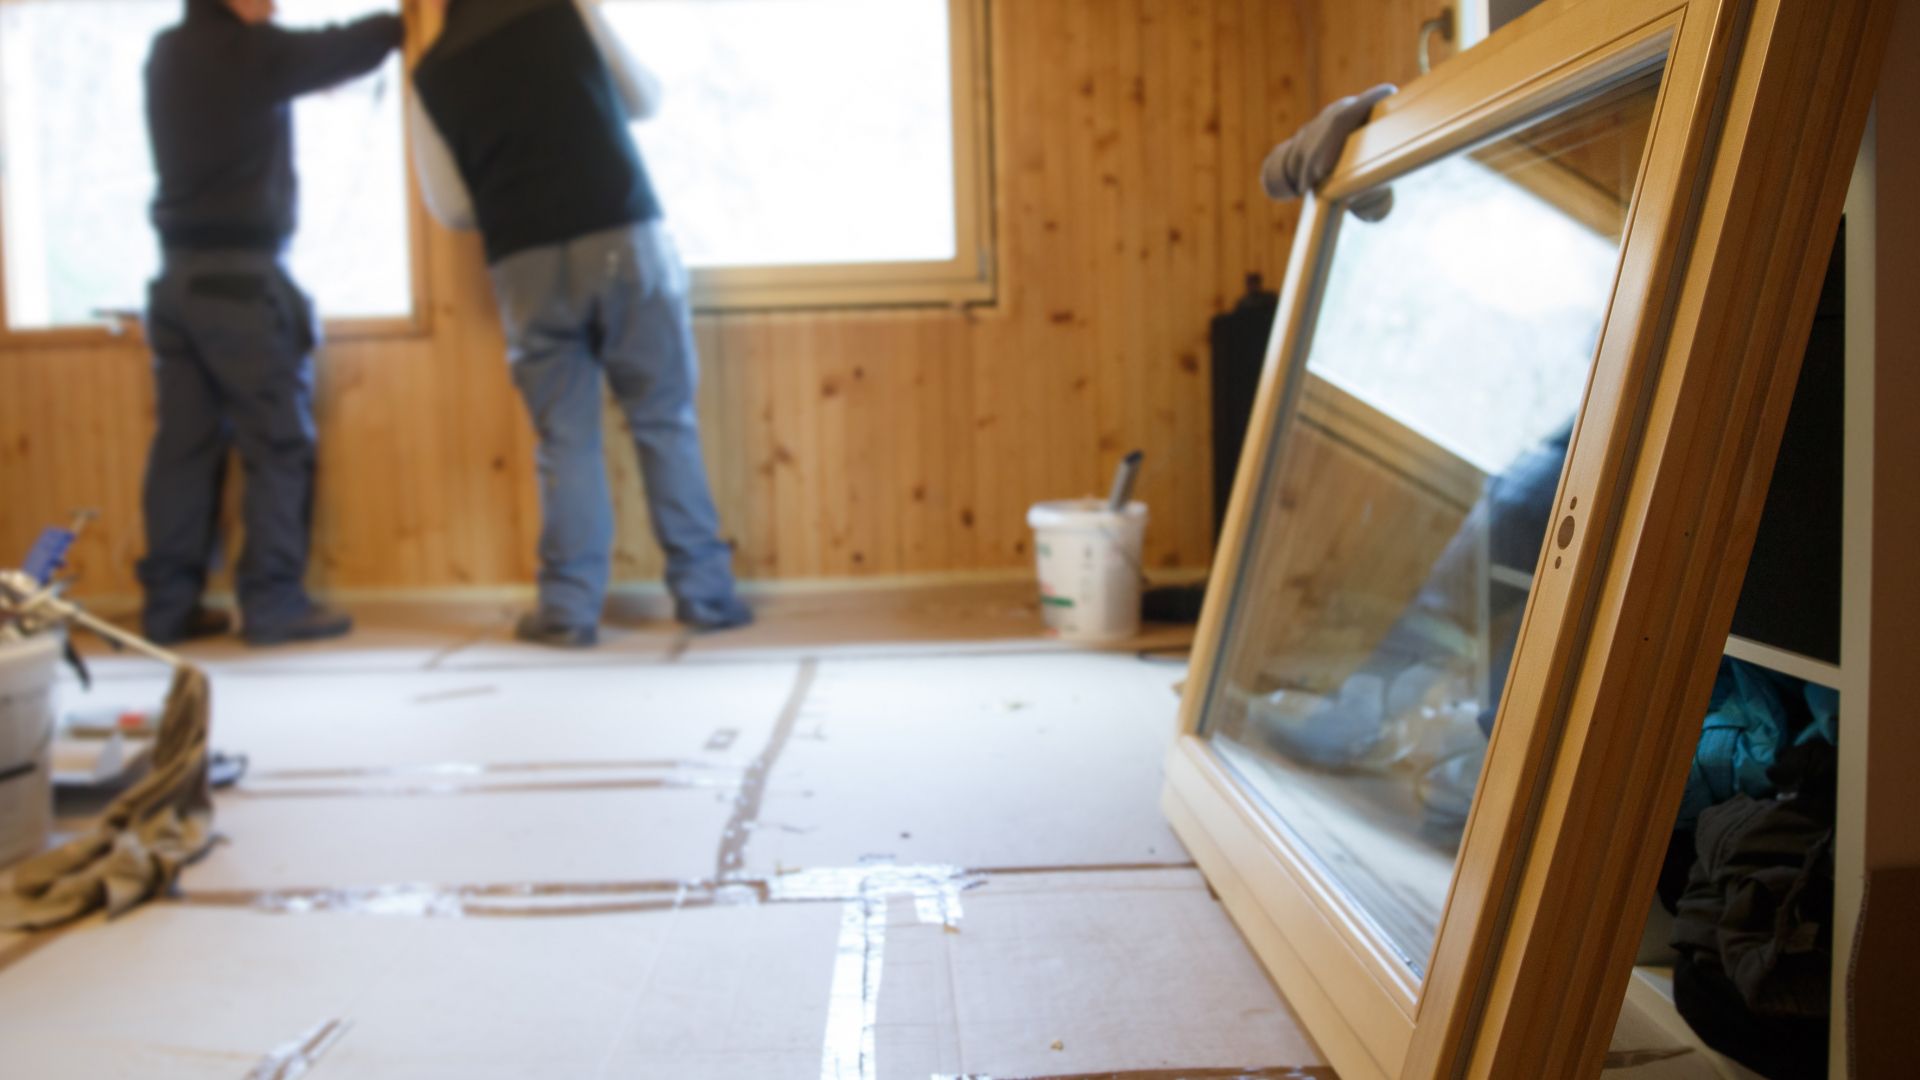 Workers installing new energy-efficient windows